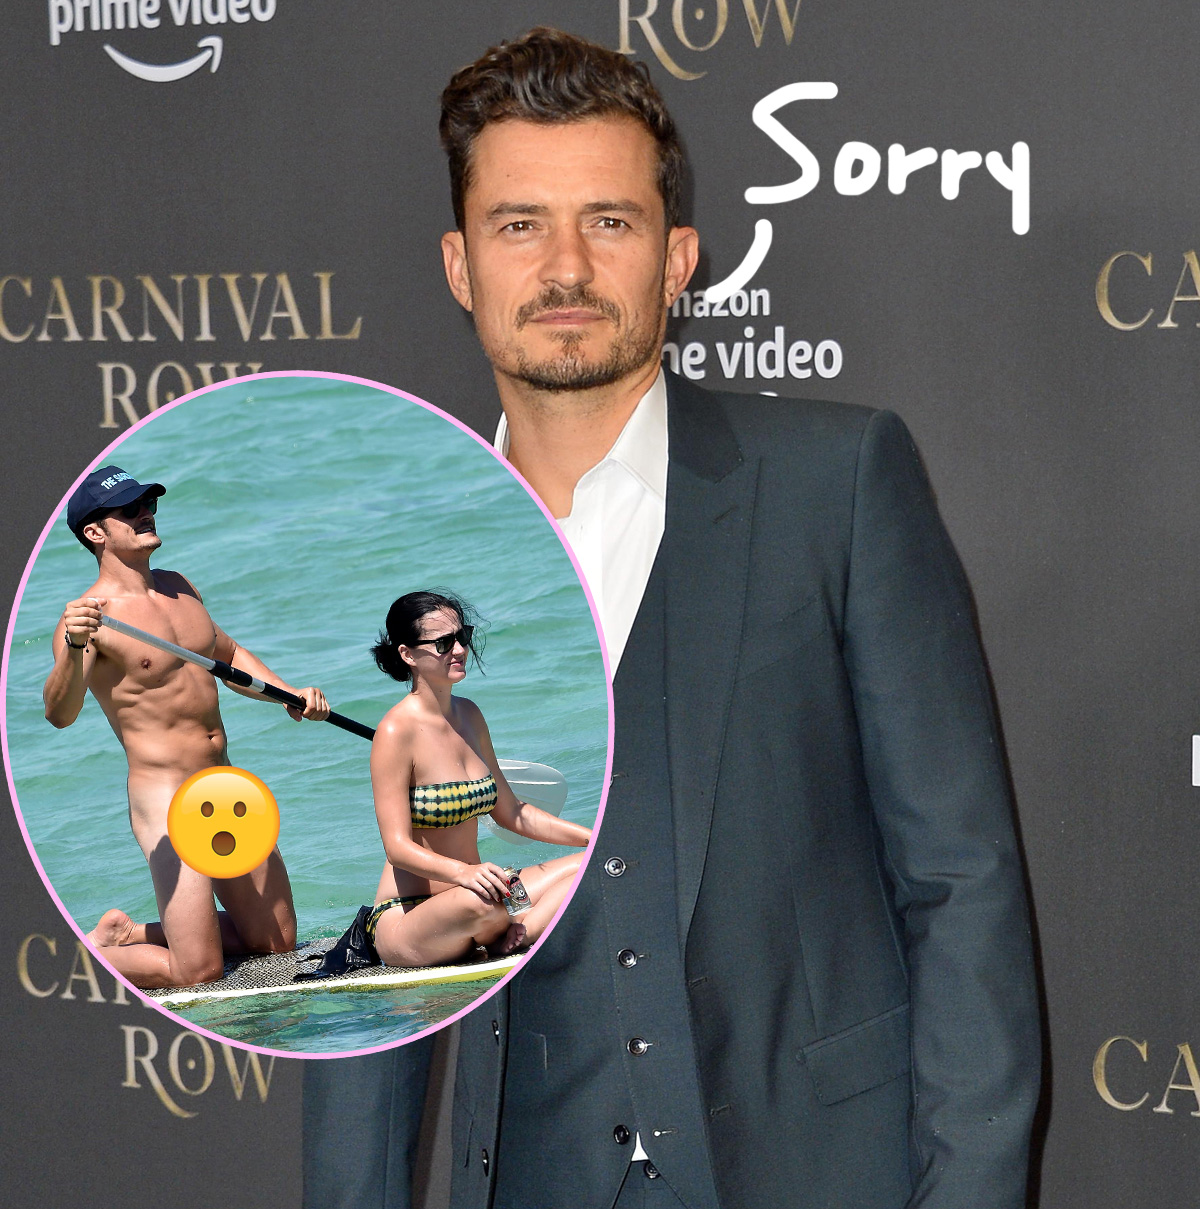 Orlando Bloom Now Claims His Dick ISN'T As Big As Those Paddle-Boarding  Pics Made It Seem! - Perez Hilton